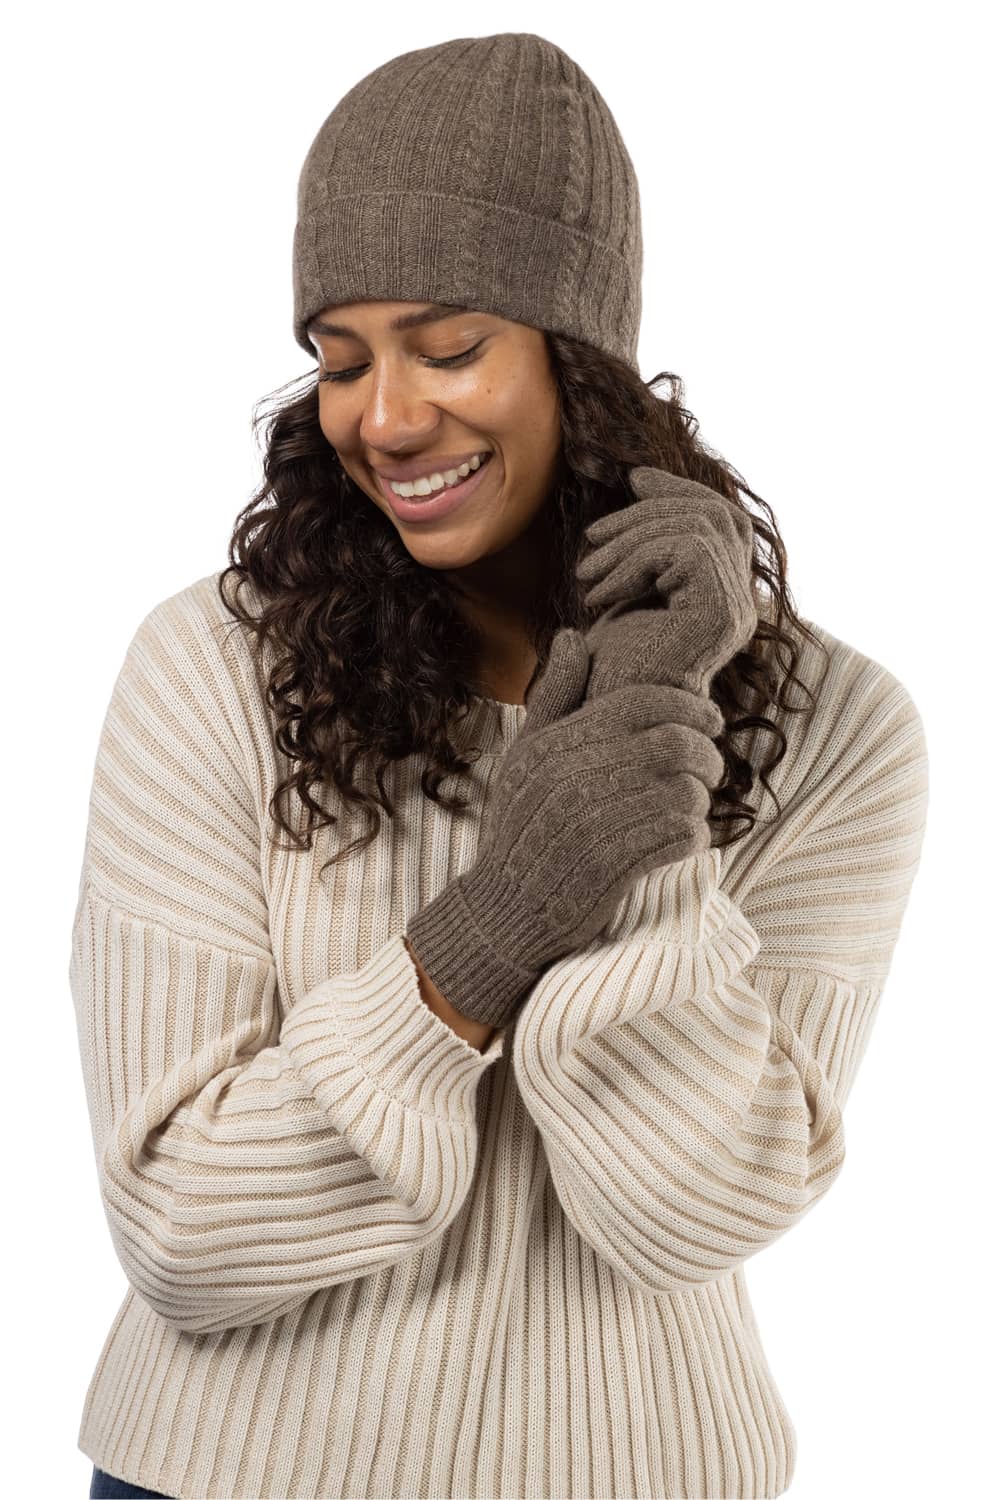 Women's 2pc 100% Pure Cashmere Cable Knit Hat & Glove Set with Gift Box Womens>Accessories>Cashmere Set Fishers Finery Cappuccino One Size Fits Most